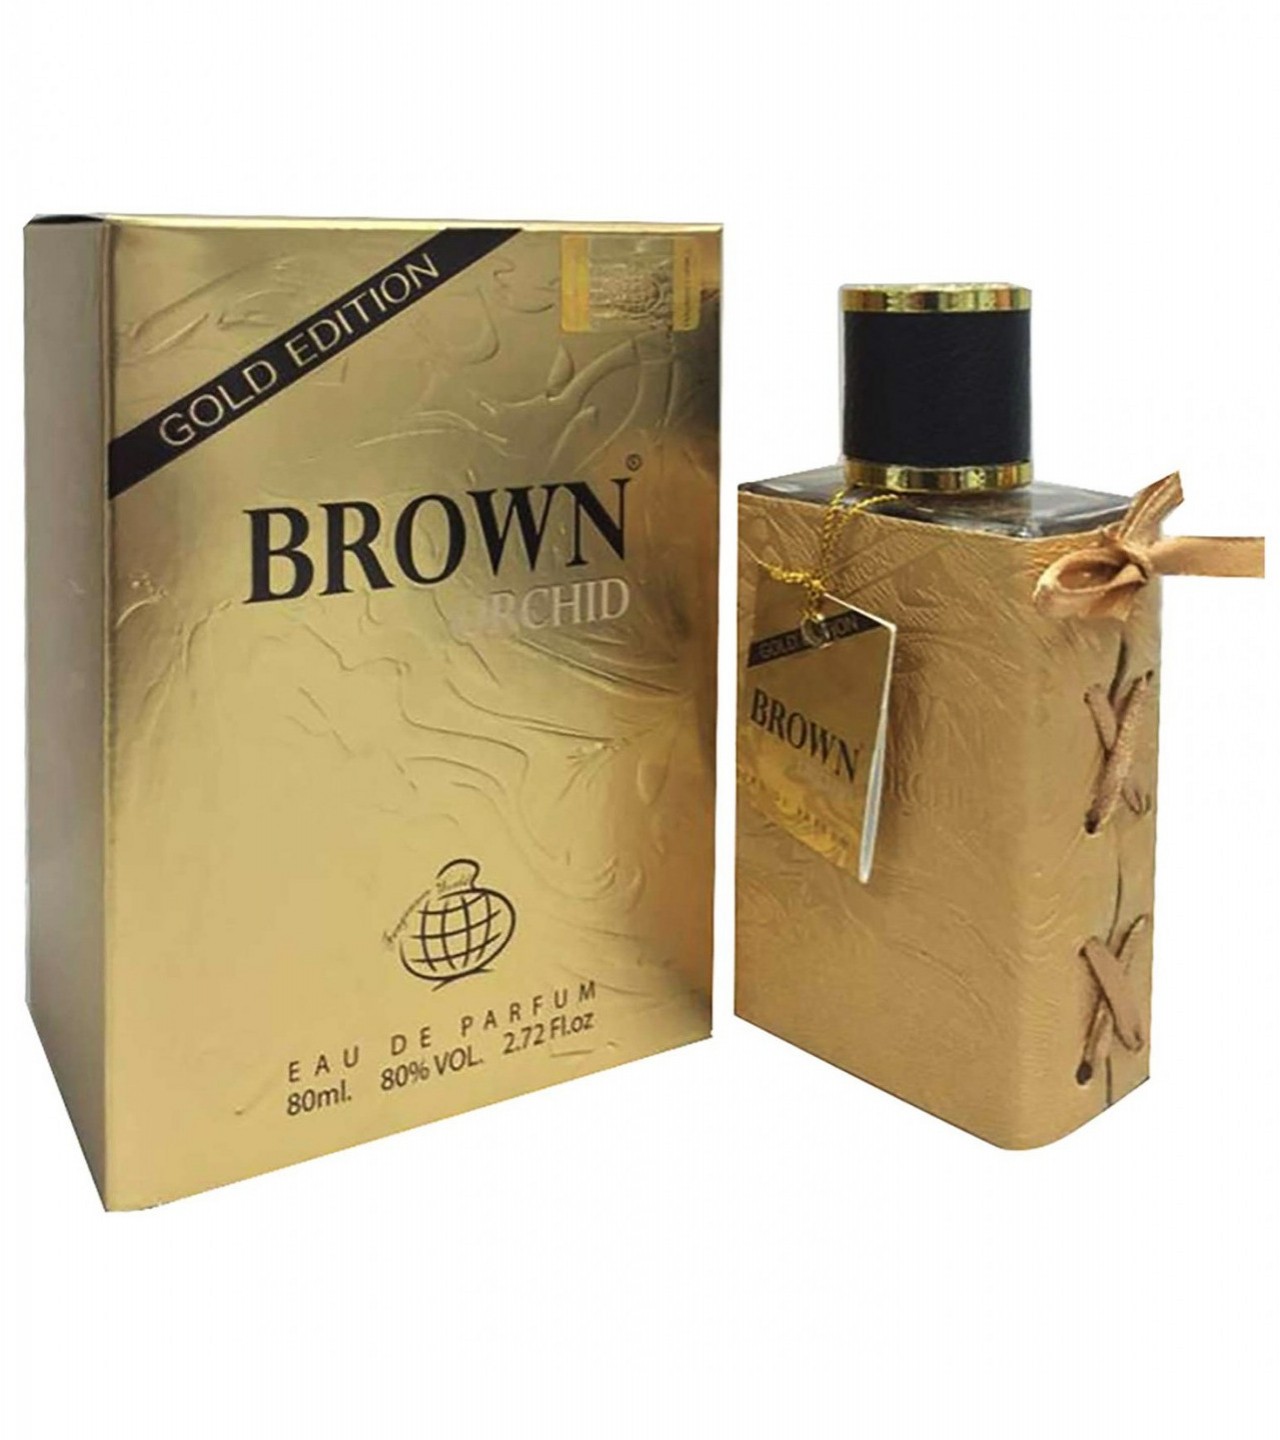 Brown Orchid Gold Edition Perfume For Men – EDP – 80 ml